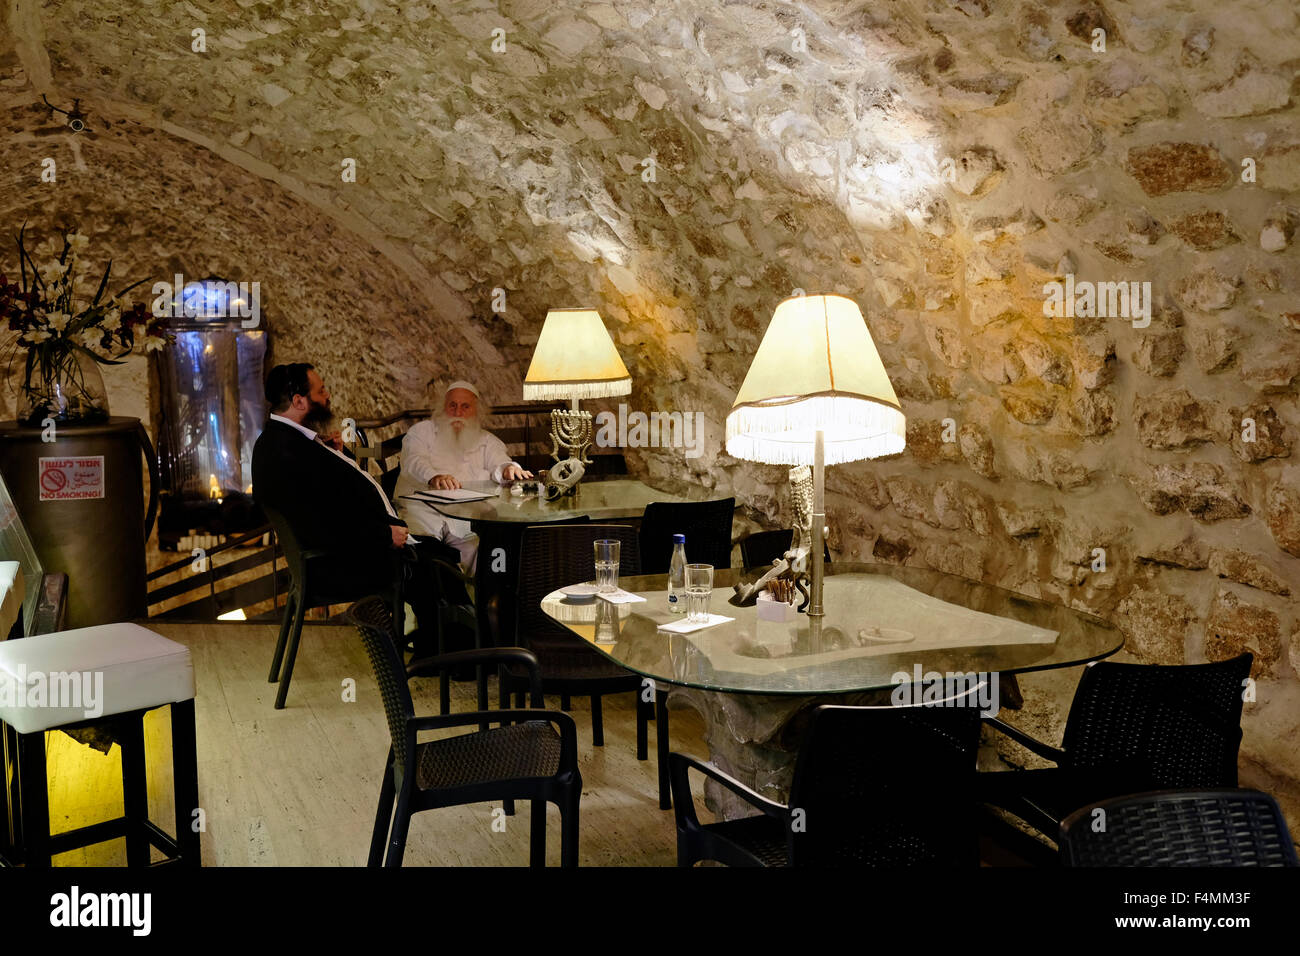 Religious Jews siting inside the 'Between the Arches' Kosher restaurant in el Wad or Hagai street in the Muslim Quarter old city East Jerusalem Israel Stock Photo